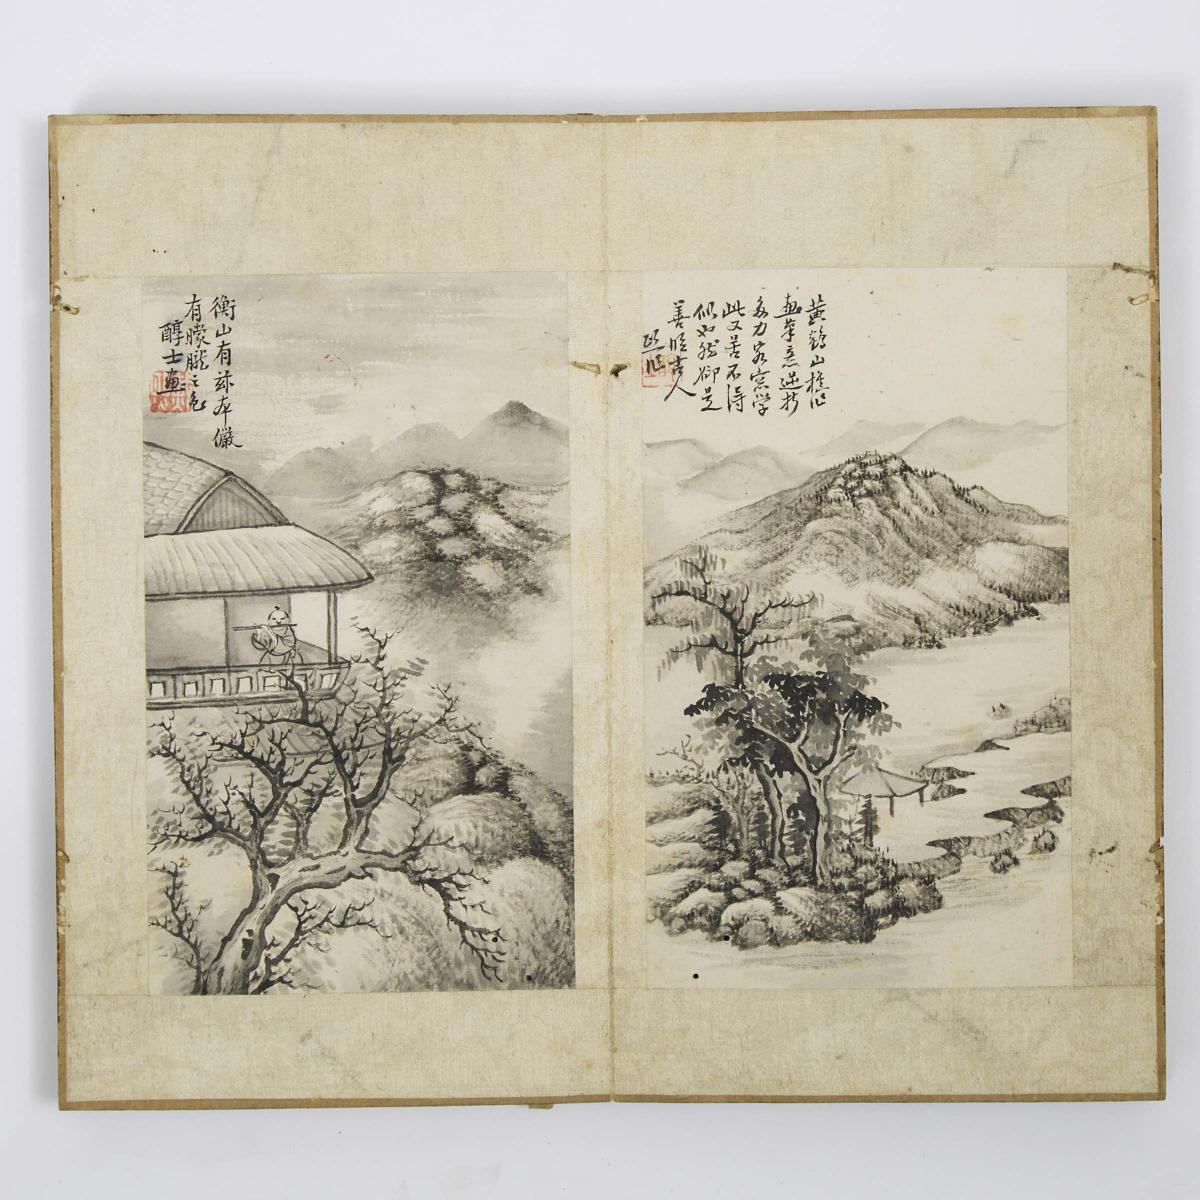 Attributed to Dai Xi (1801-1860), A Landscape Painting Album, 戴熙 (1801 – 1860) (传) 山水花卉册 十开 水墨纸本, ea - Image 3 of 8